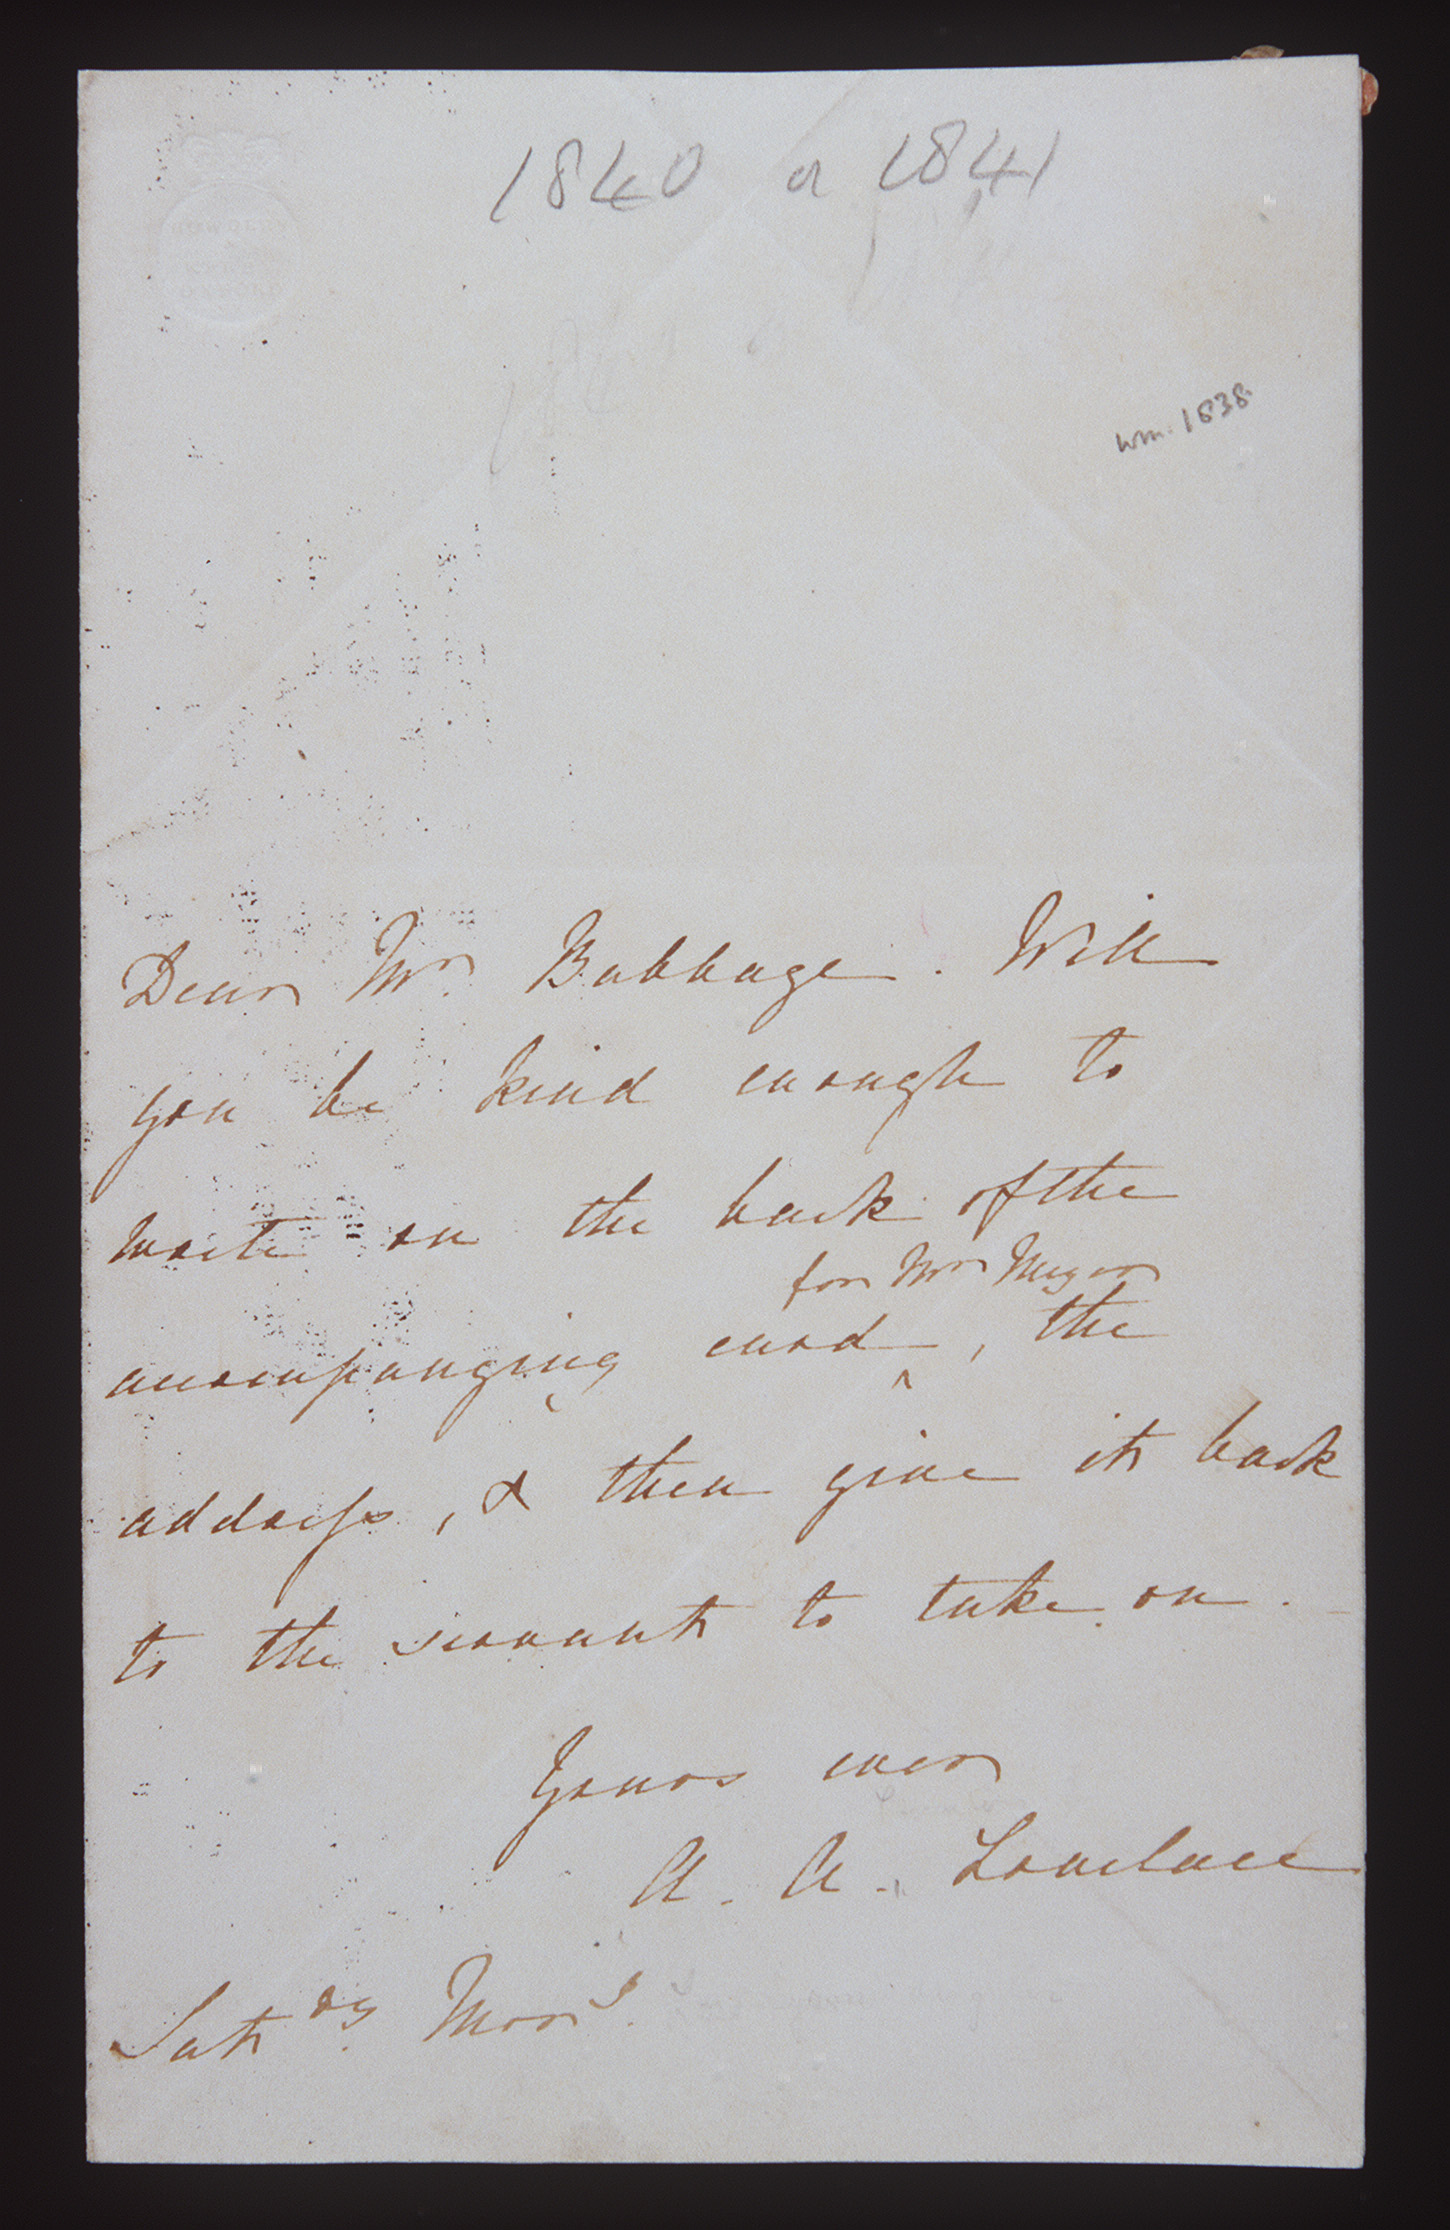 Letters from Ada Lovelace to Charles Babbage